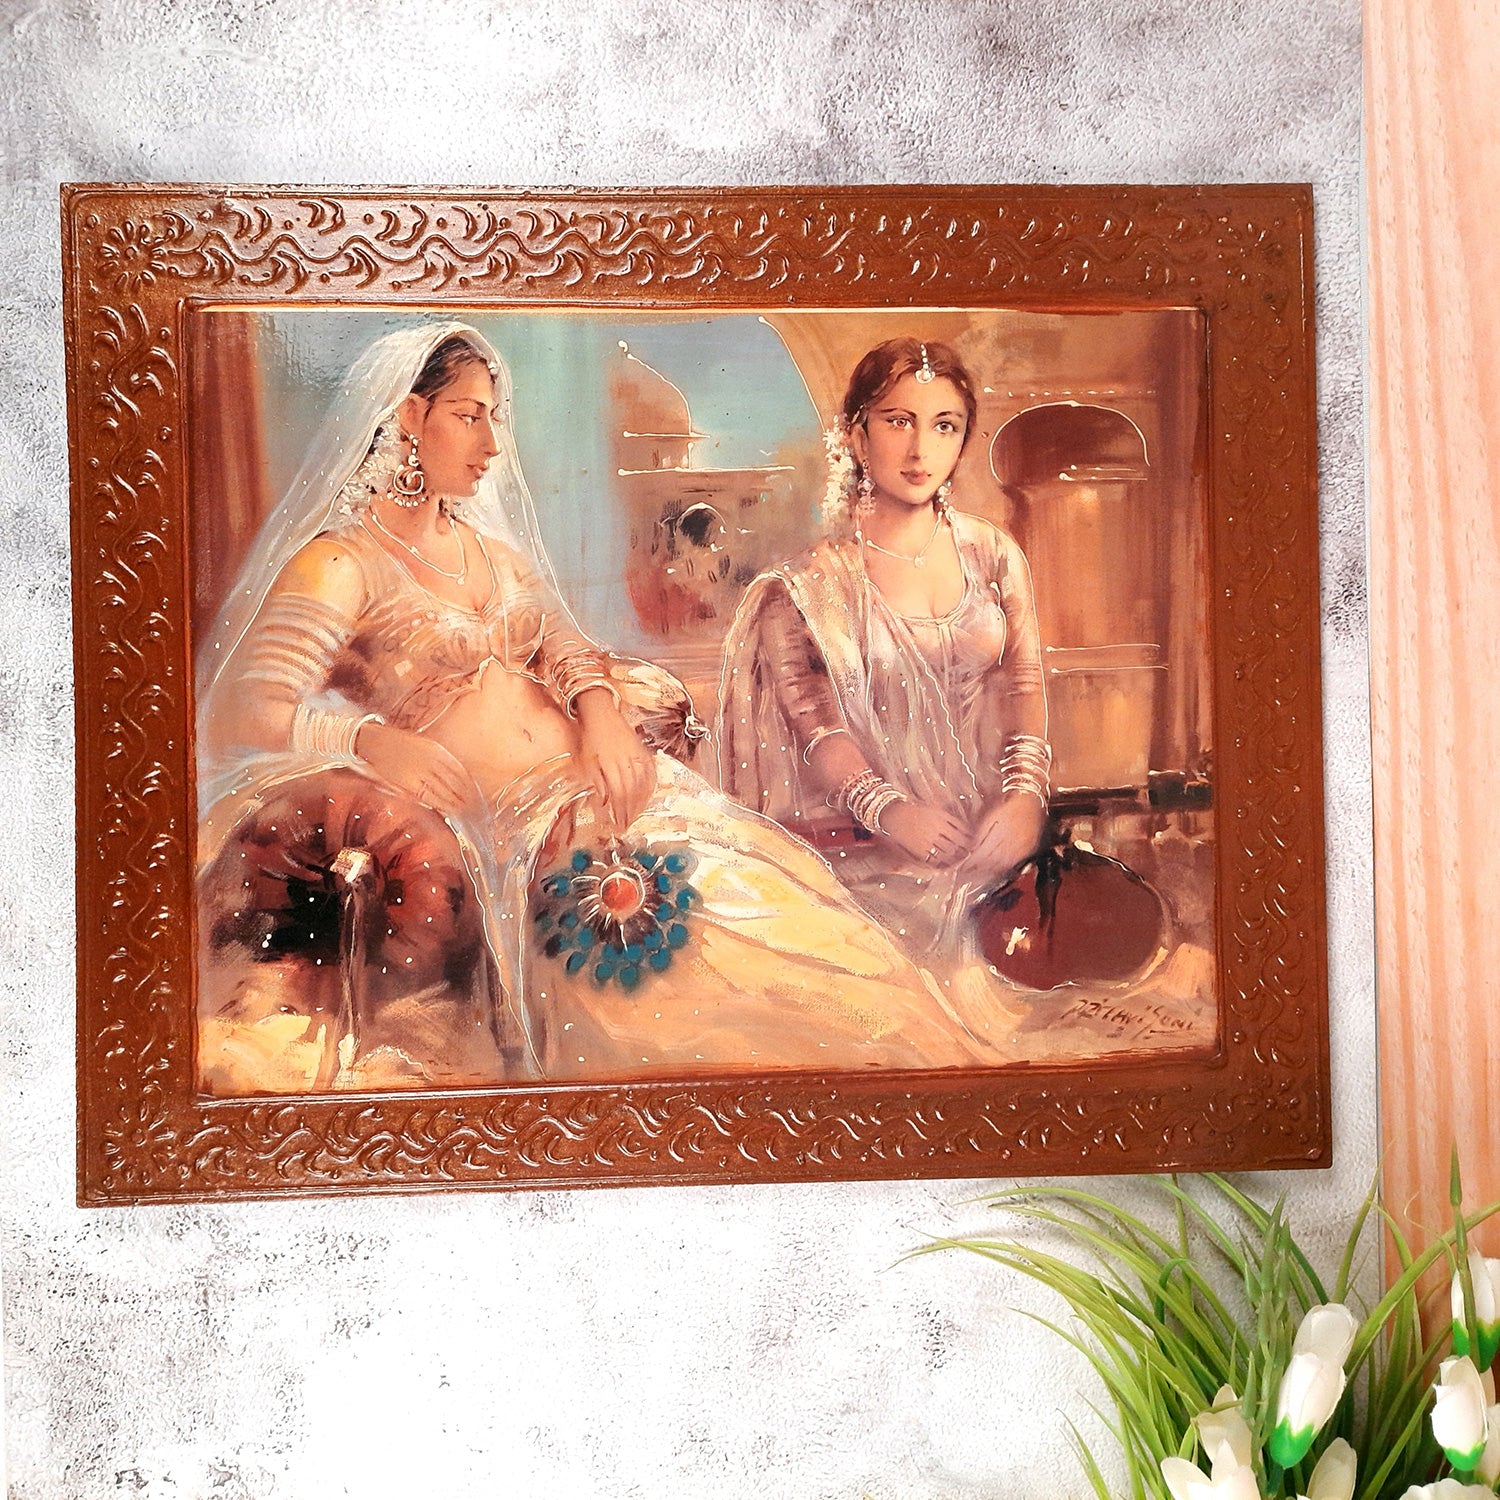 Wooden Framed Poster Wall Hanging - Traditional Lady Design - for Home, Paintings for Living Room, Bedroom, Hallway, Office Decor & Gifts - 20 Inch - Apkamart